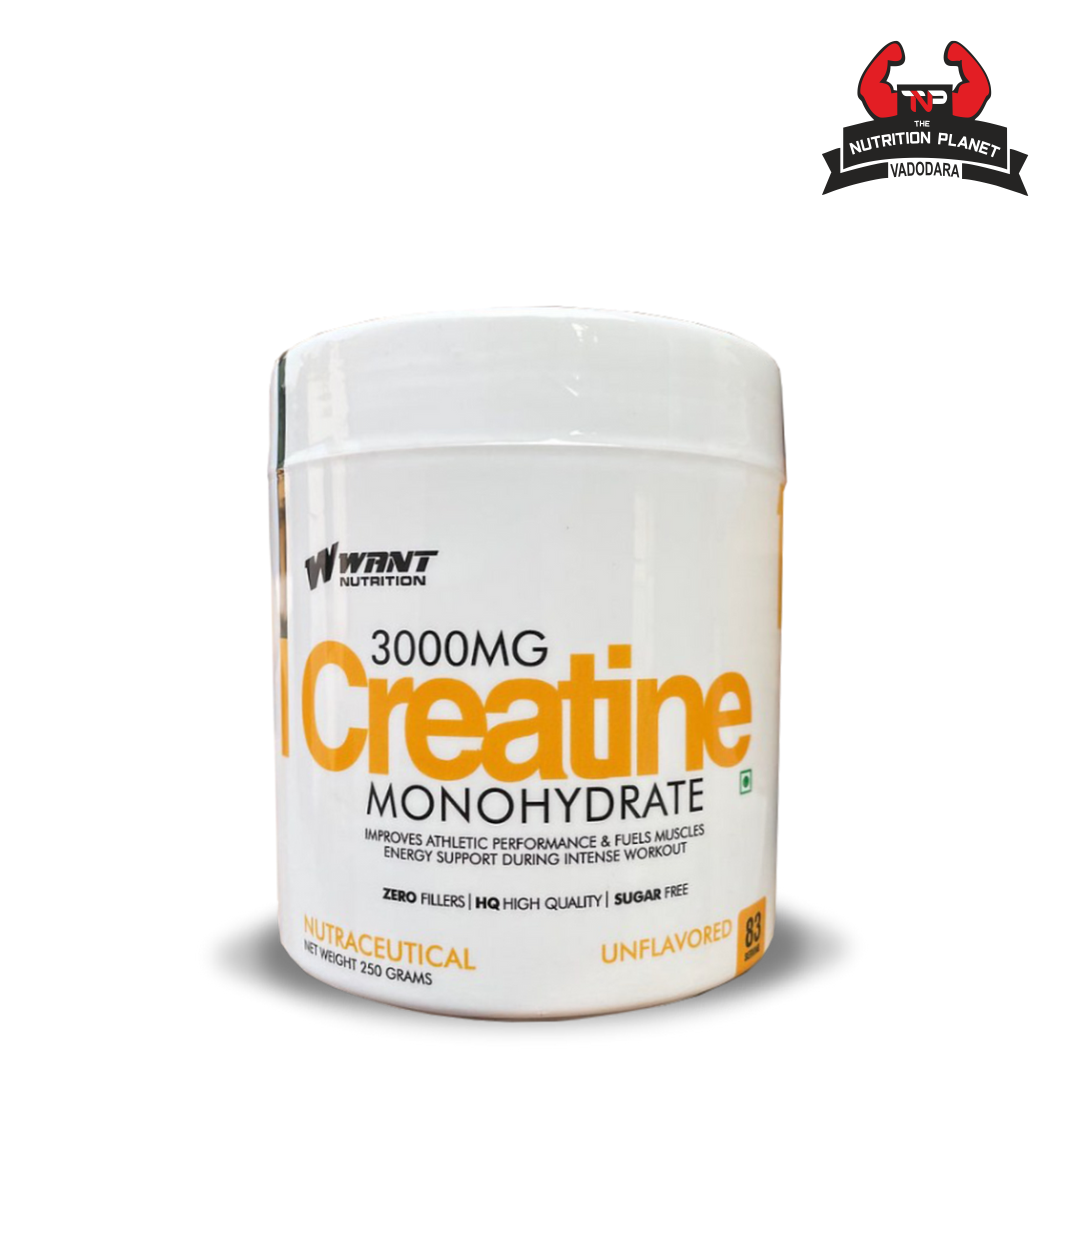 Want Nutrition CREATINE 3000MG with official Authentic Tag